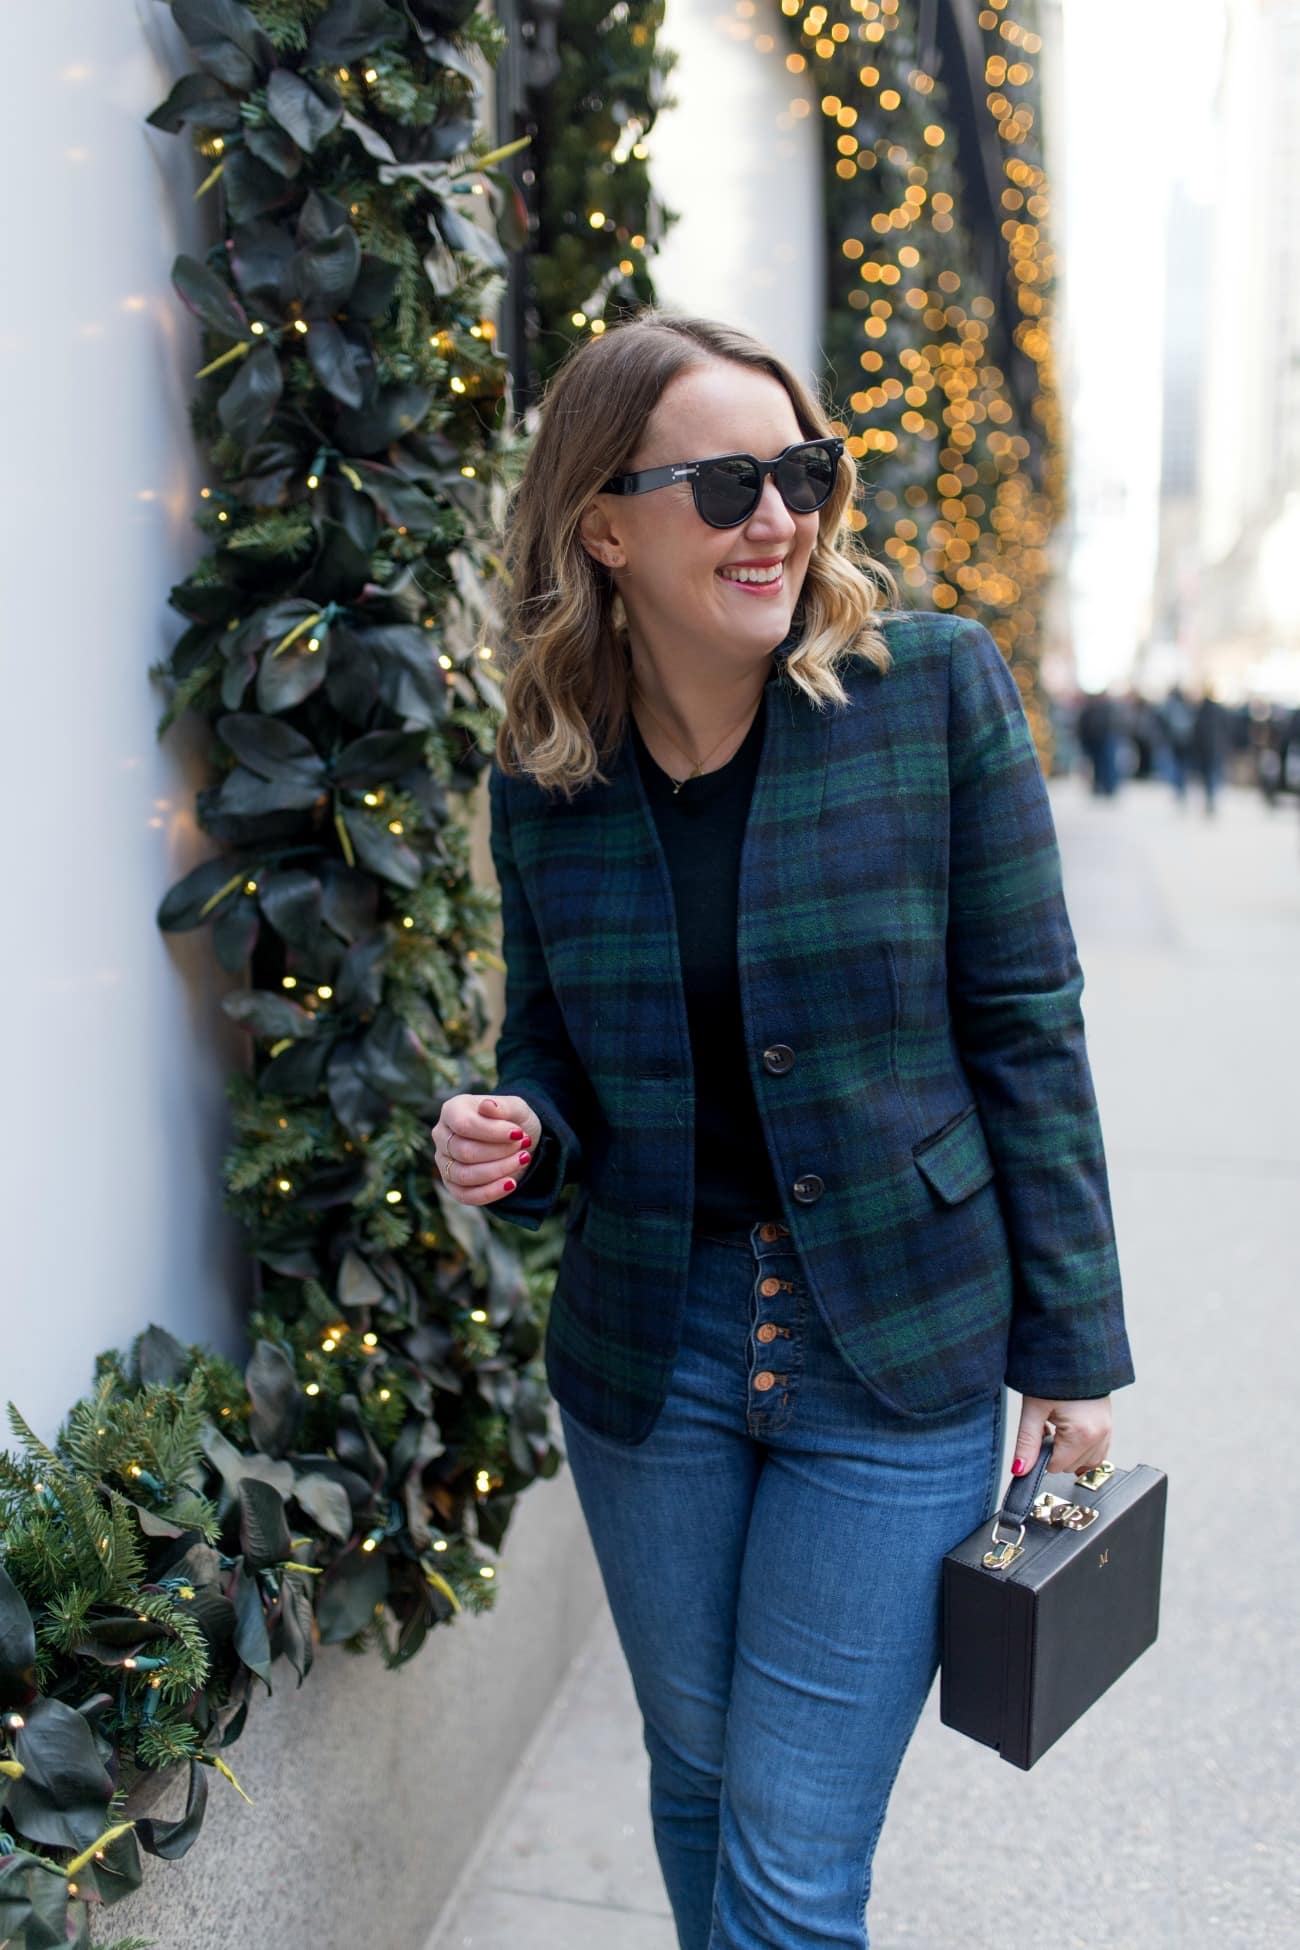 Tartan Blazer I Tell Me About Yourself - Holiday Edition| wit & whimsy